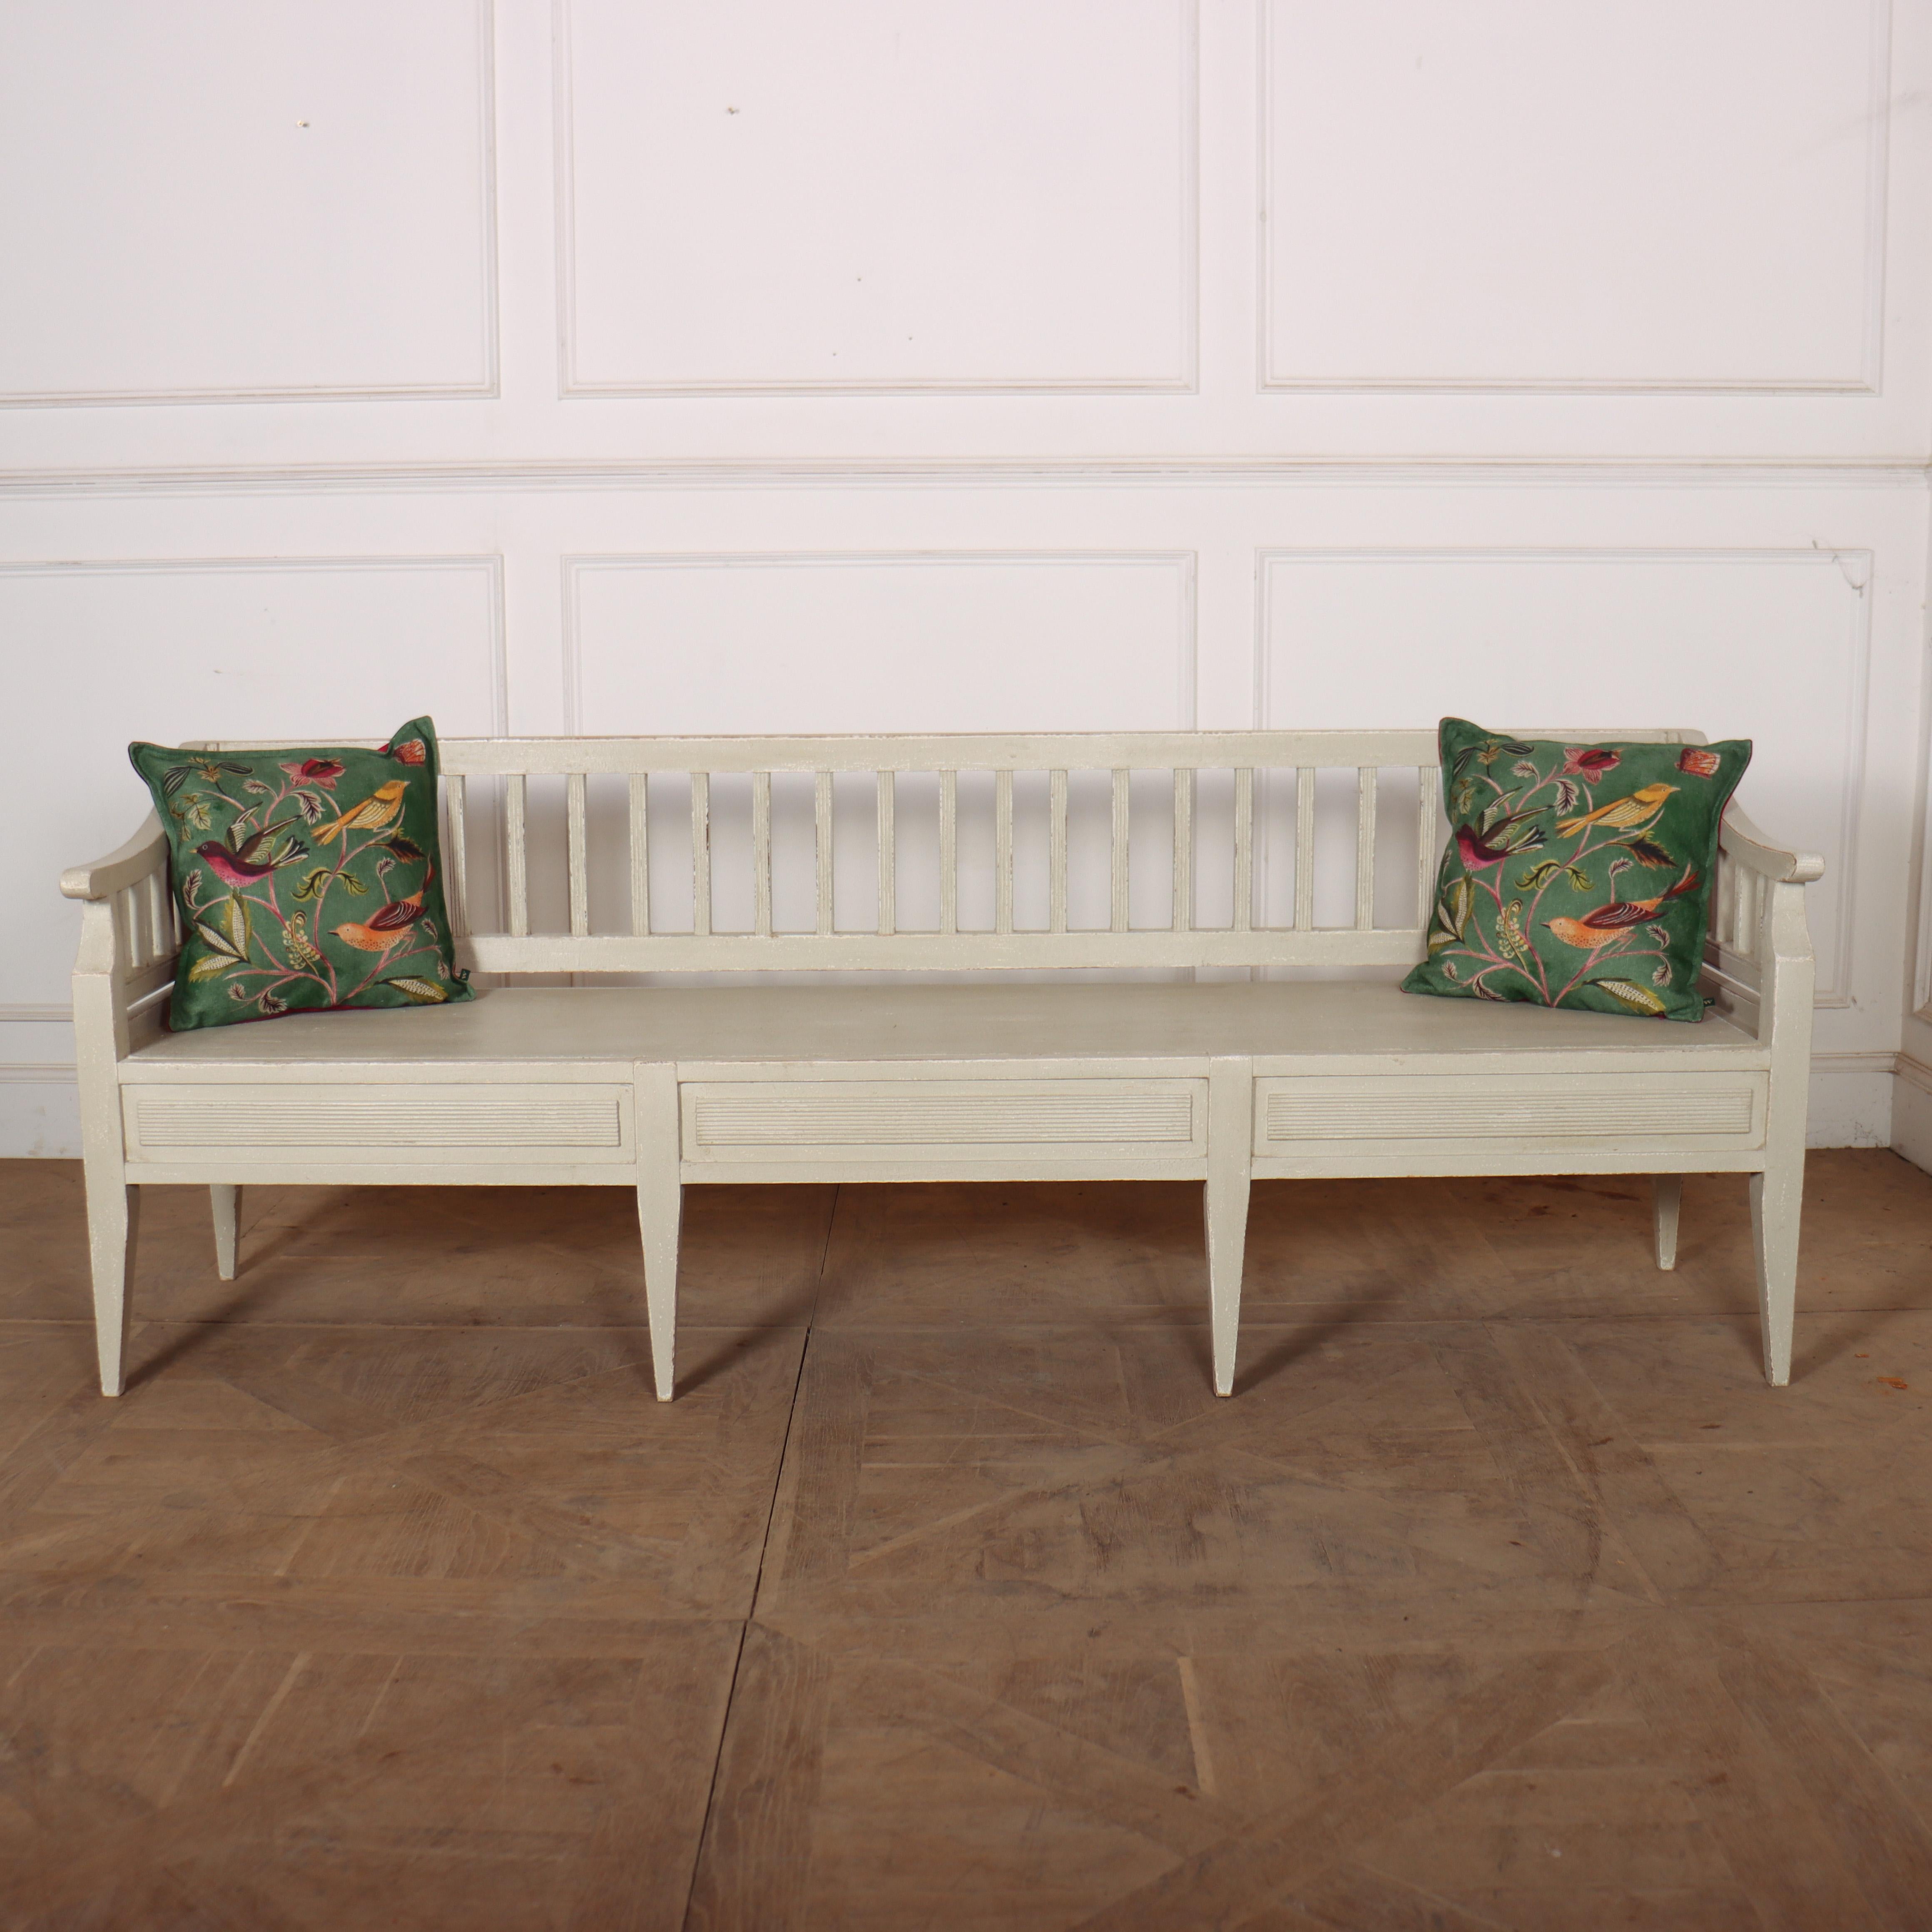 Bespoke Gustavian Style Bench In Good Condition For Sale In Leamington Spa, Warwickshire